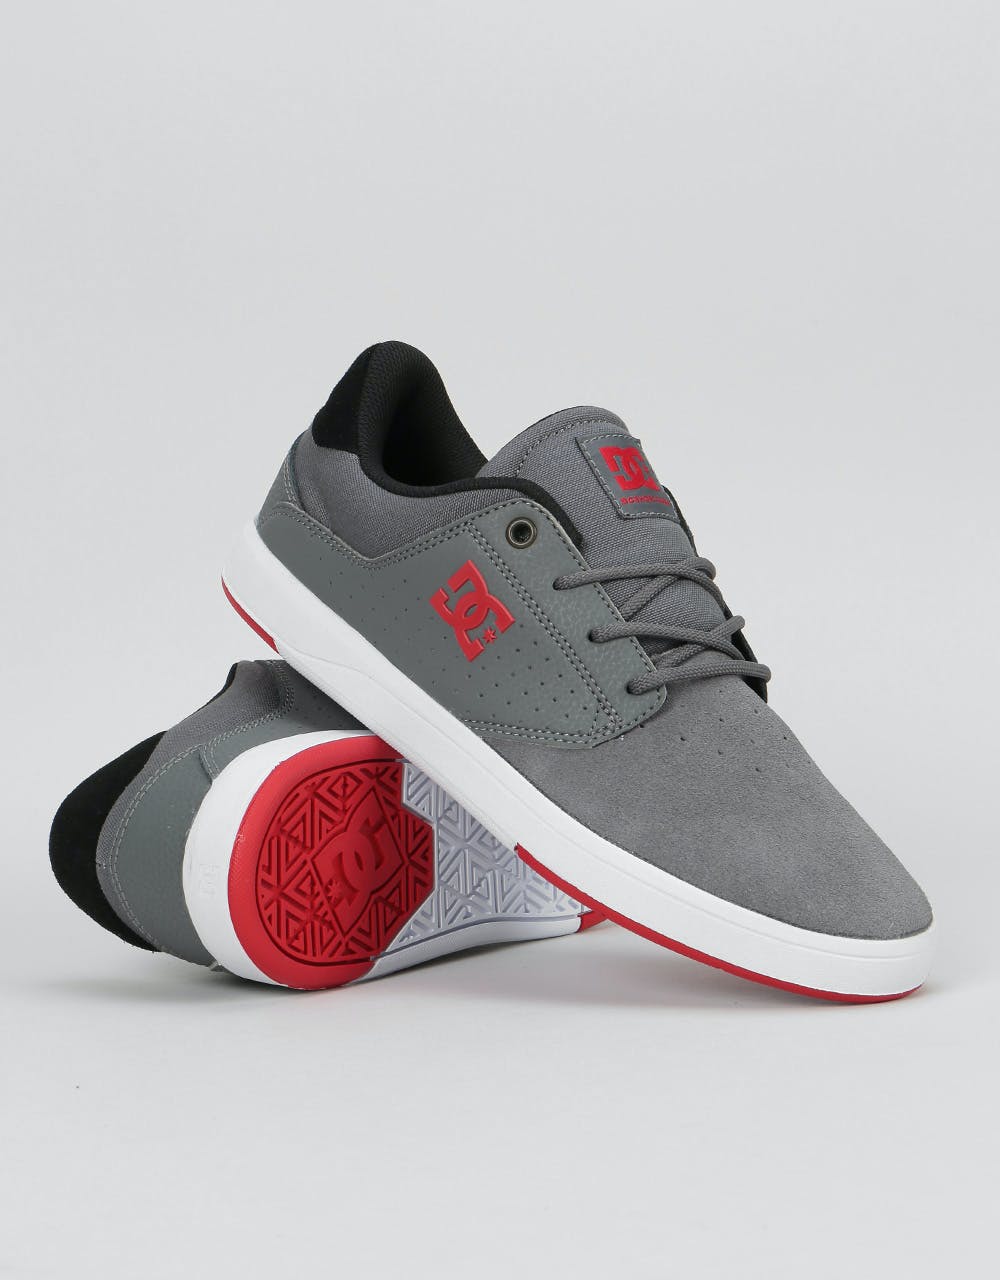 DC Plaza TC Skate Shoes - Grey/Red